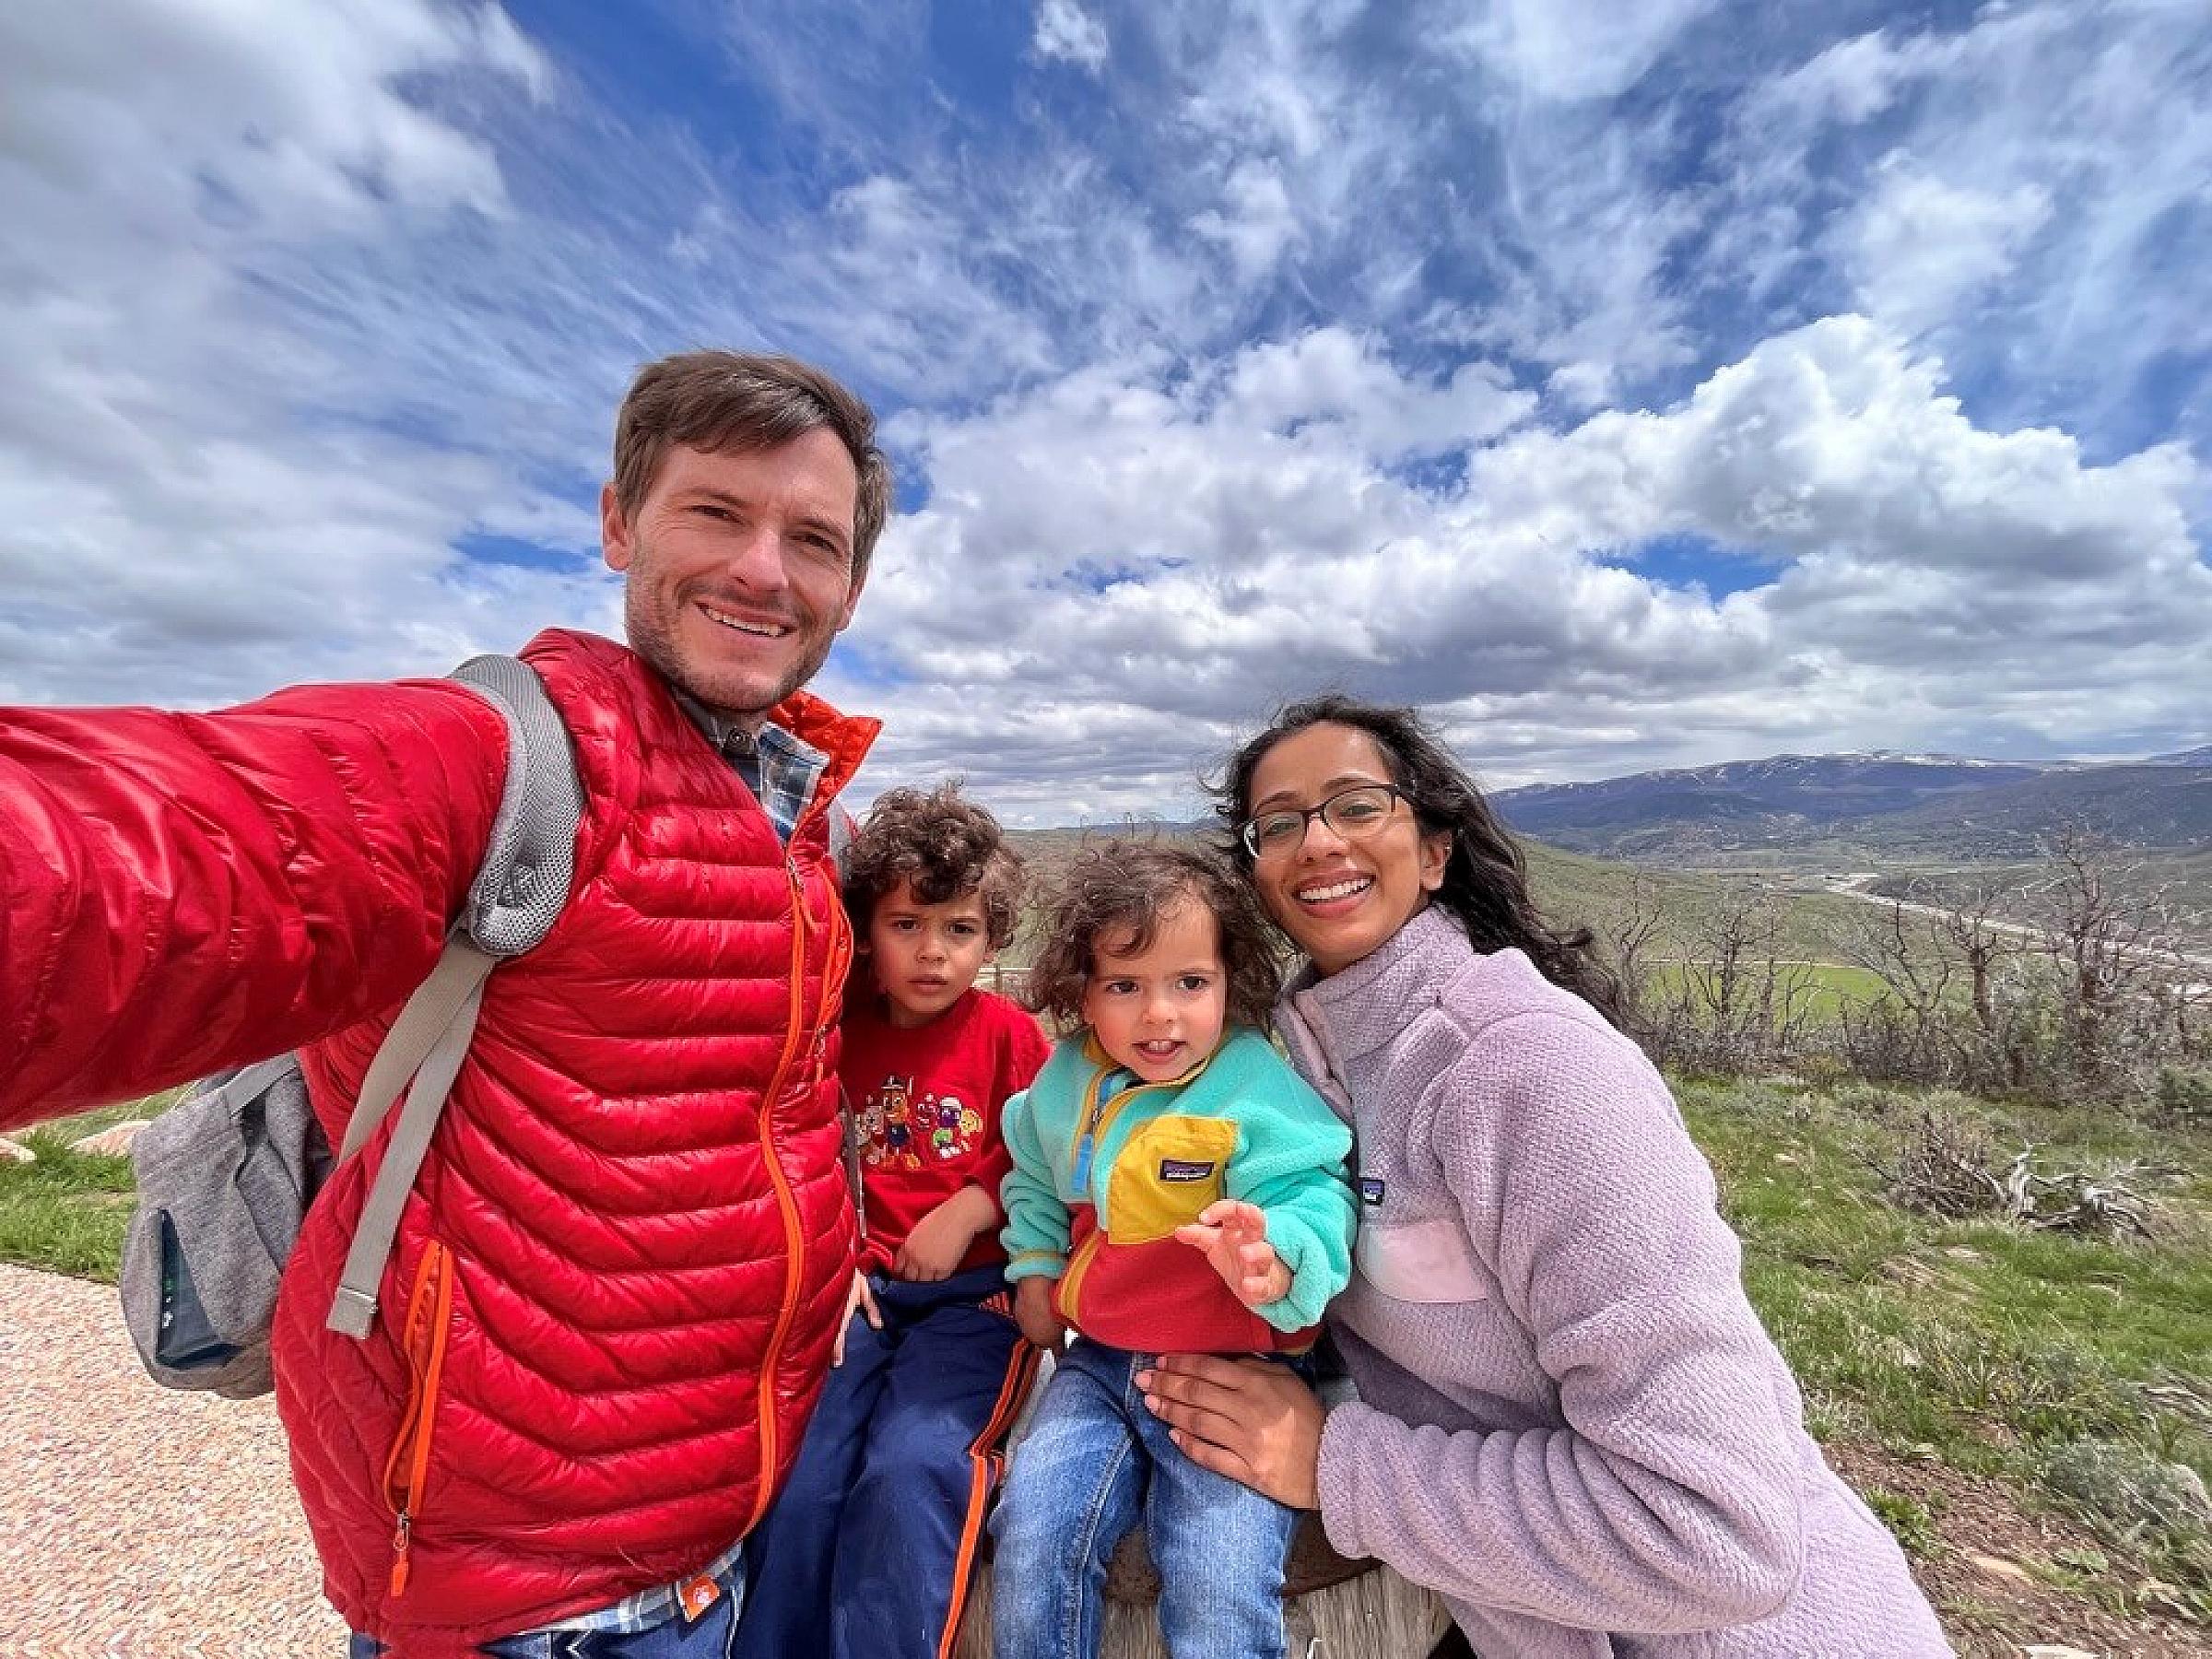 Adam Bress and family enjoying the beUTAHful outdoors